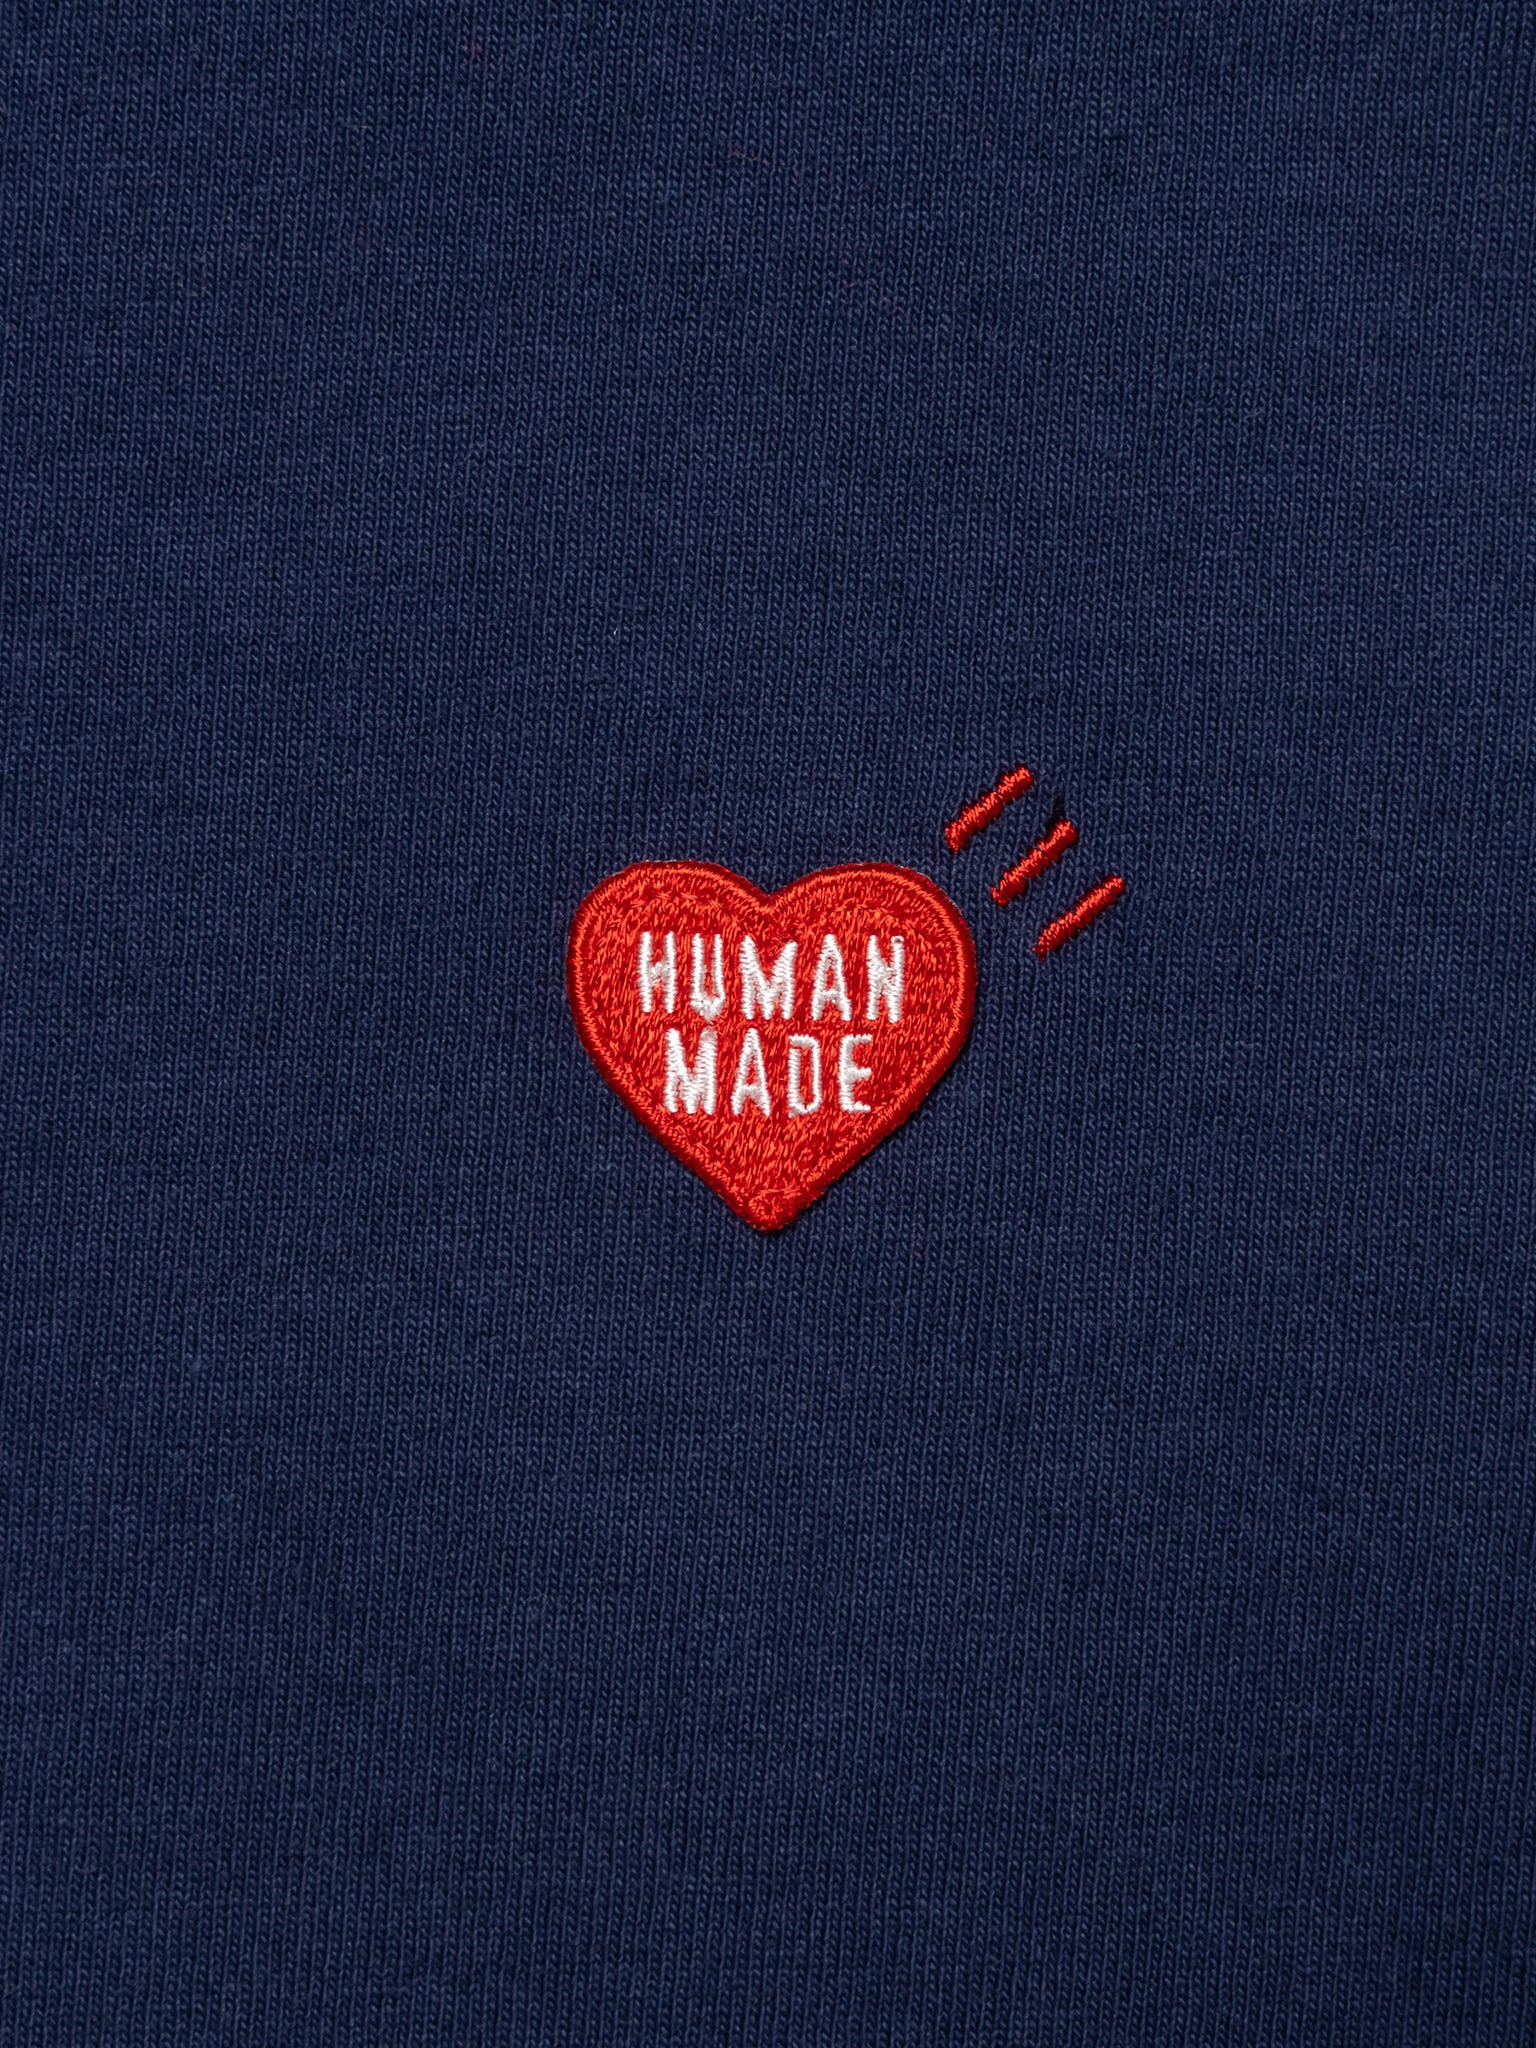 Human Made Graphic L/S T-Shirt #6